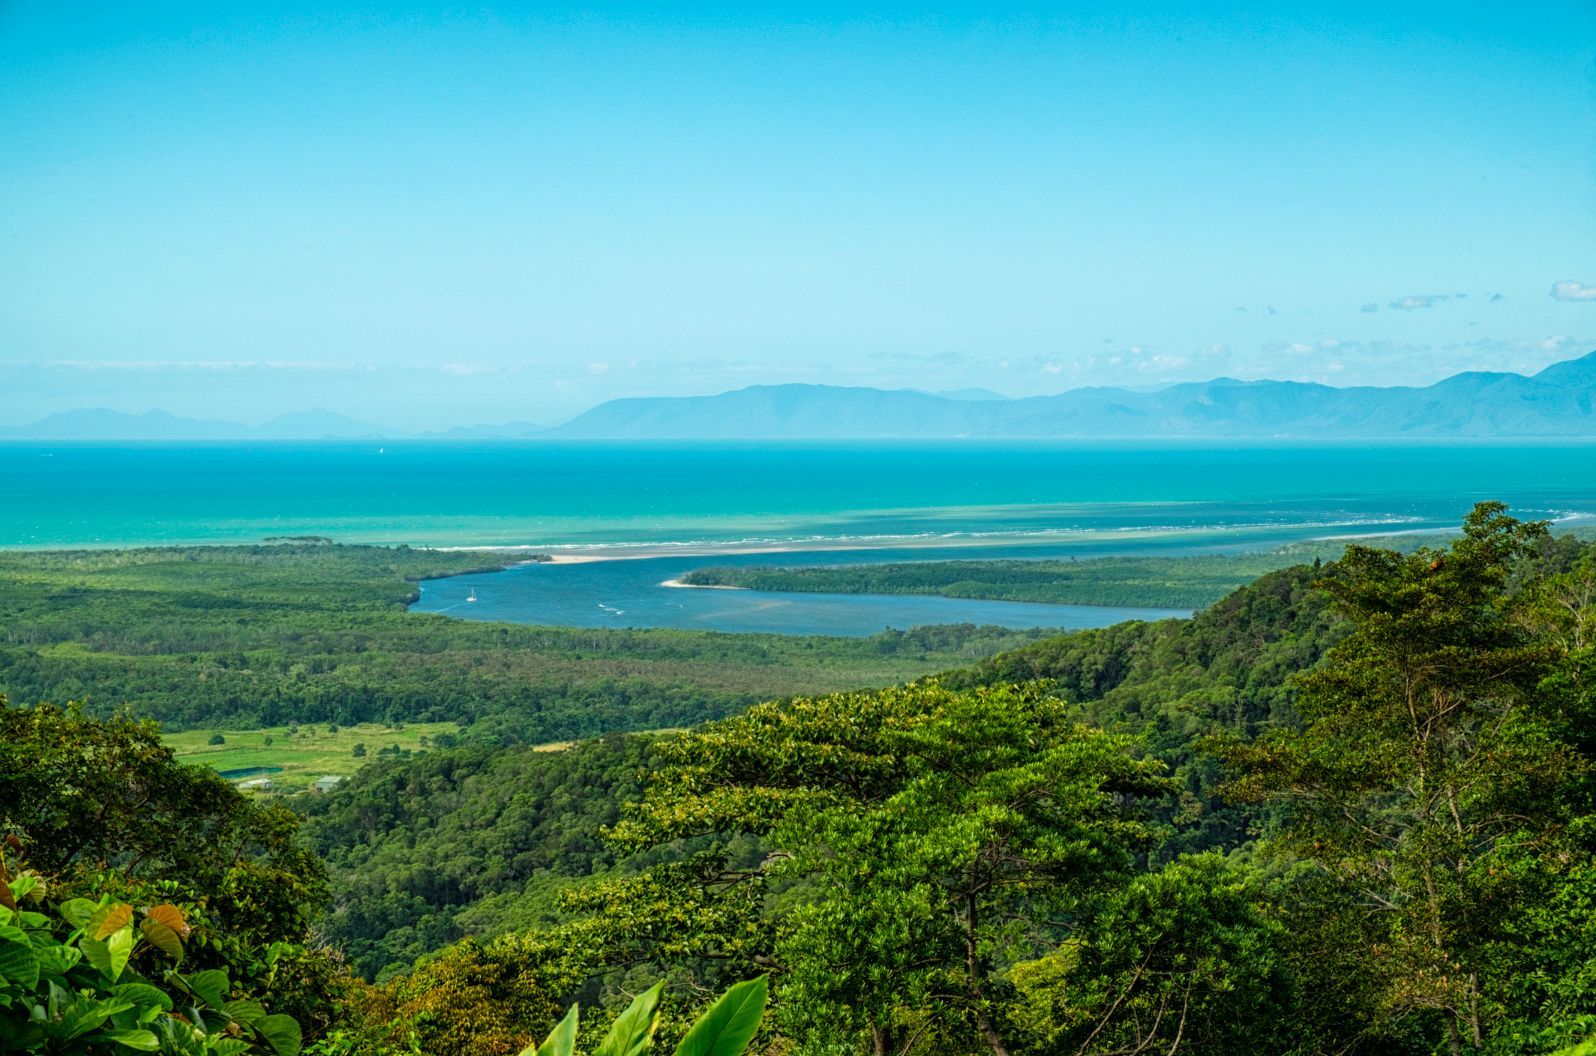 Looking out over the Daintree River and Daintree rainforest in North Queensland, Australia. Photo: Getty